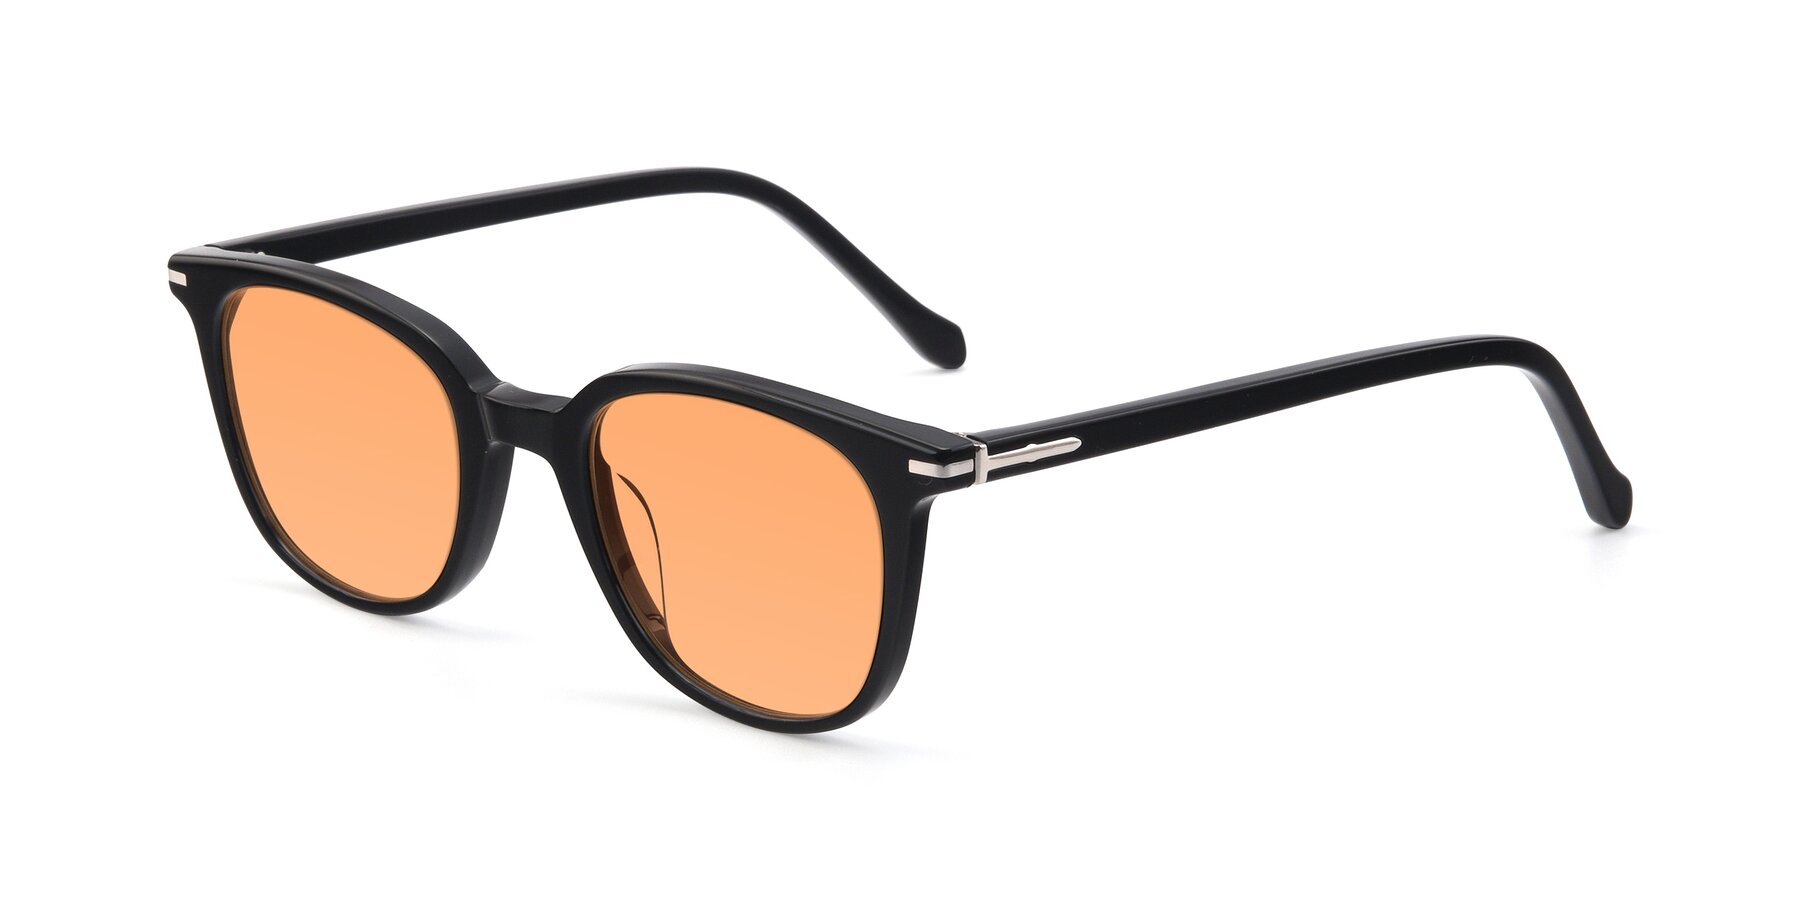 Angle of 17562 in Black with Medium Orange Tinted Lenses